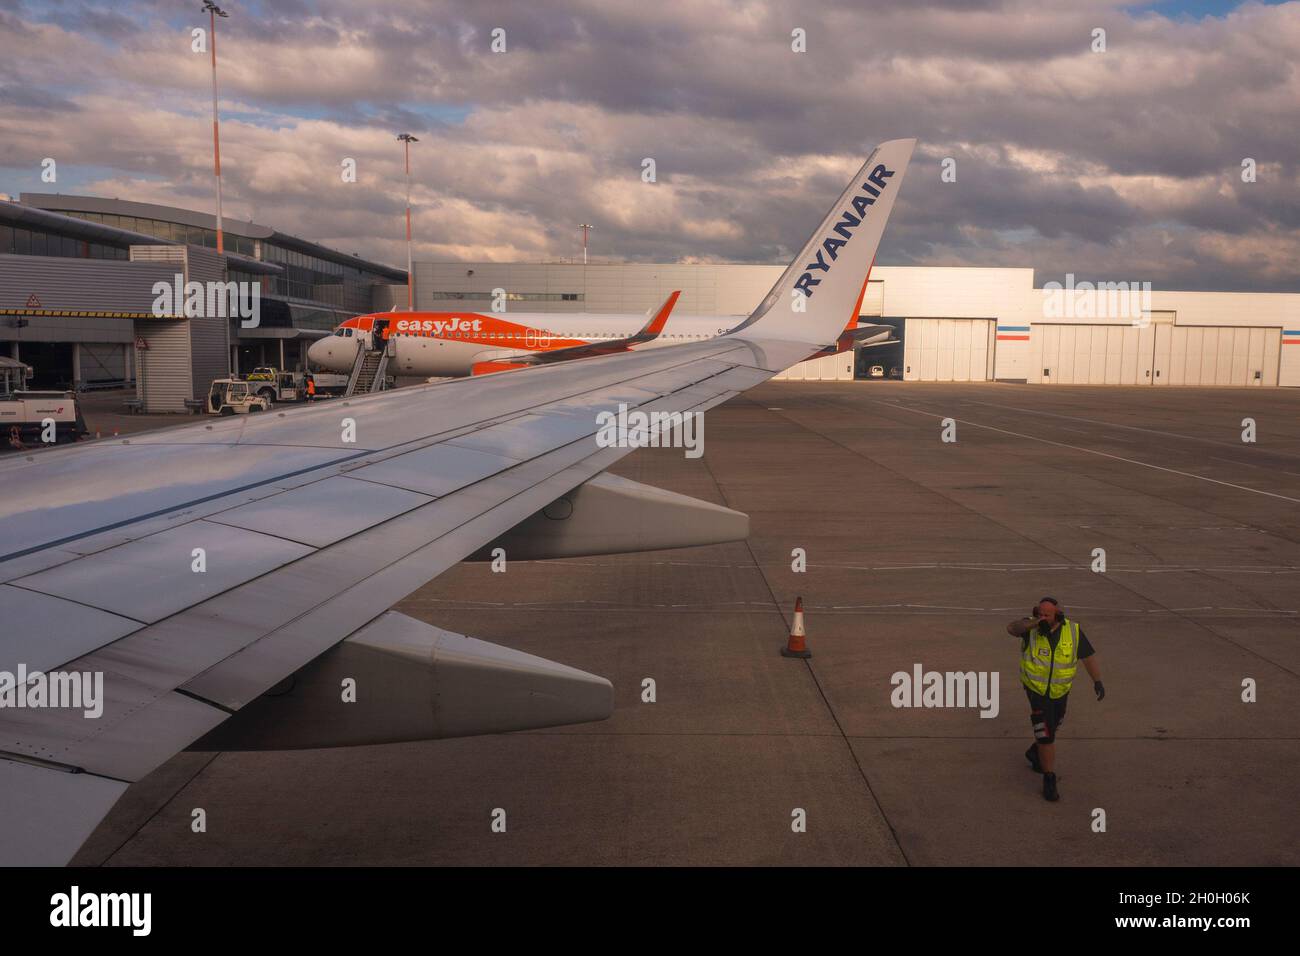 A Ryanair airplane on the runway at Liverpool John Lennon airport on August 04, 2020 in Liverpool, United Kingdom Stock Photo